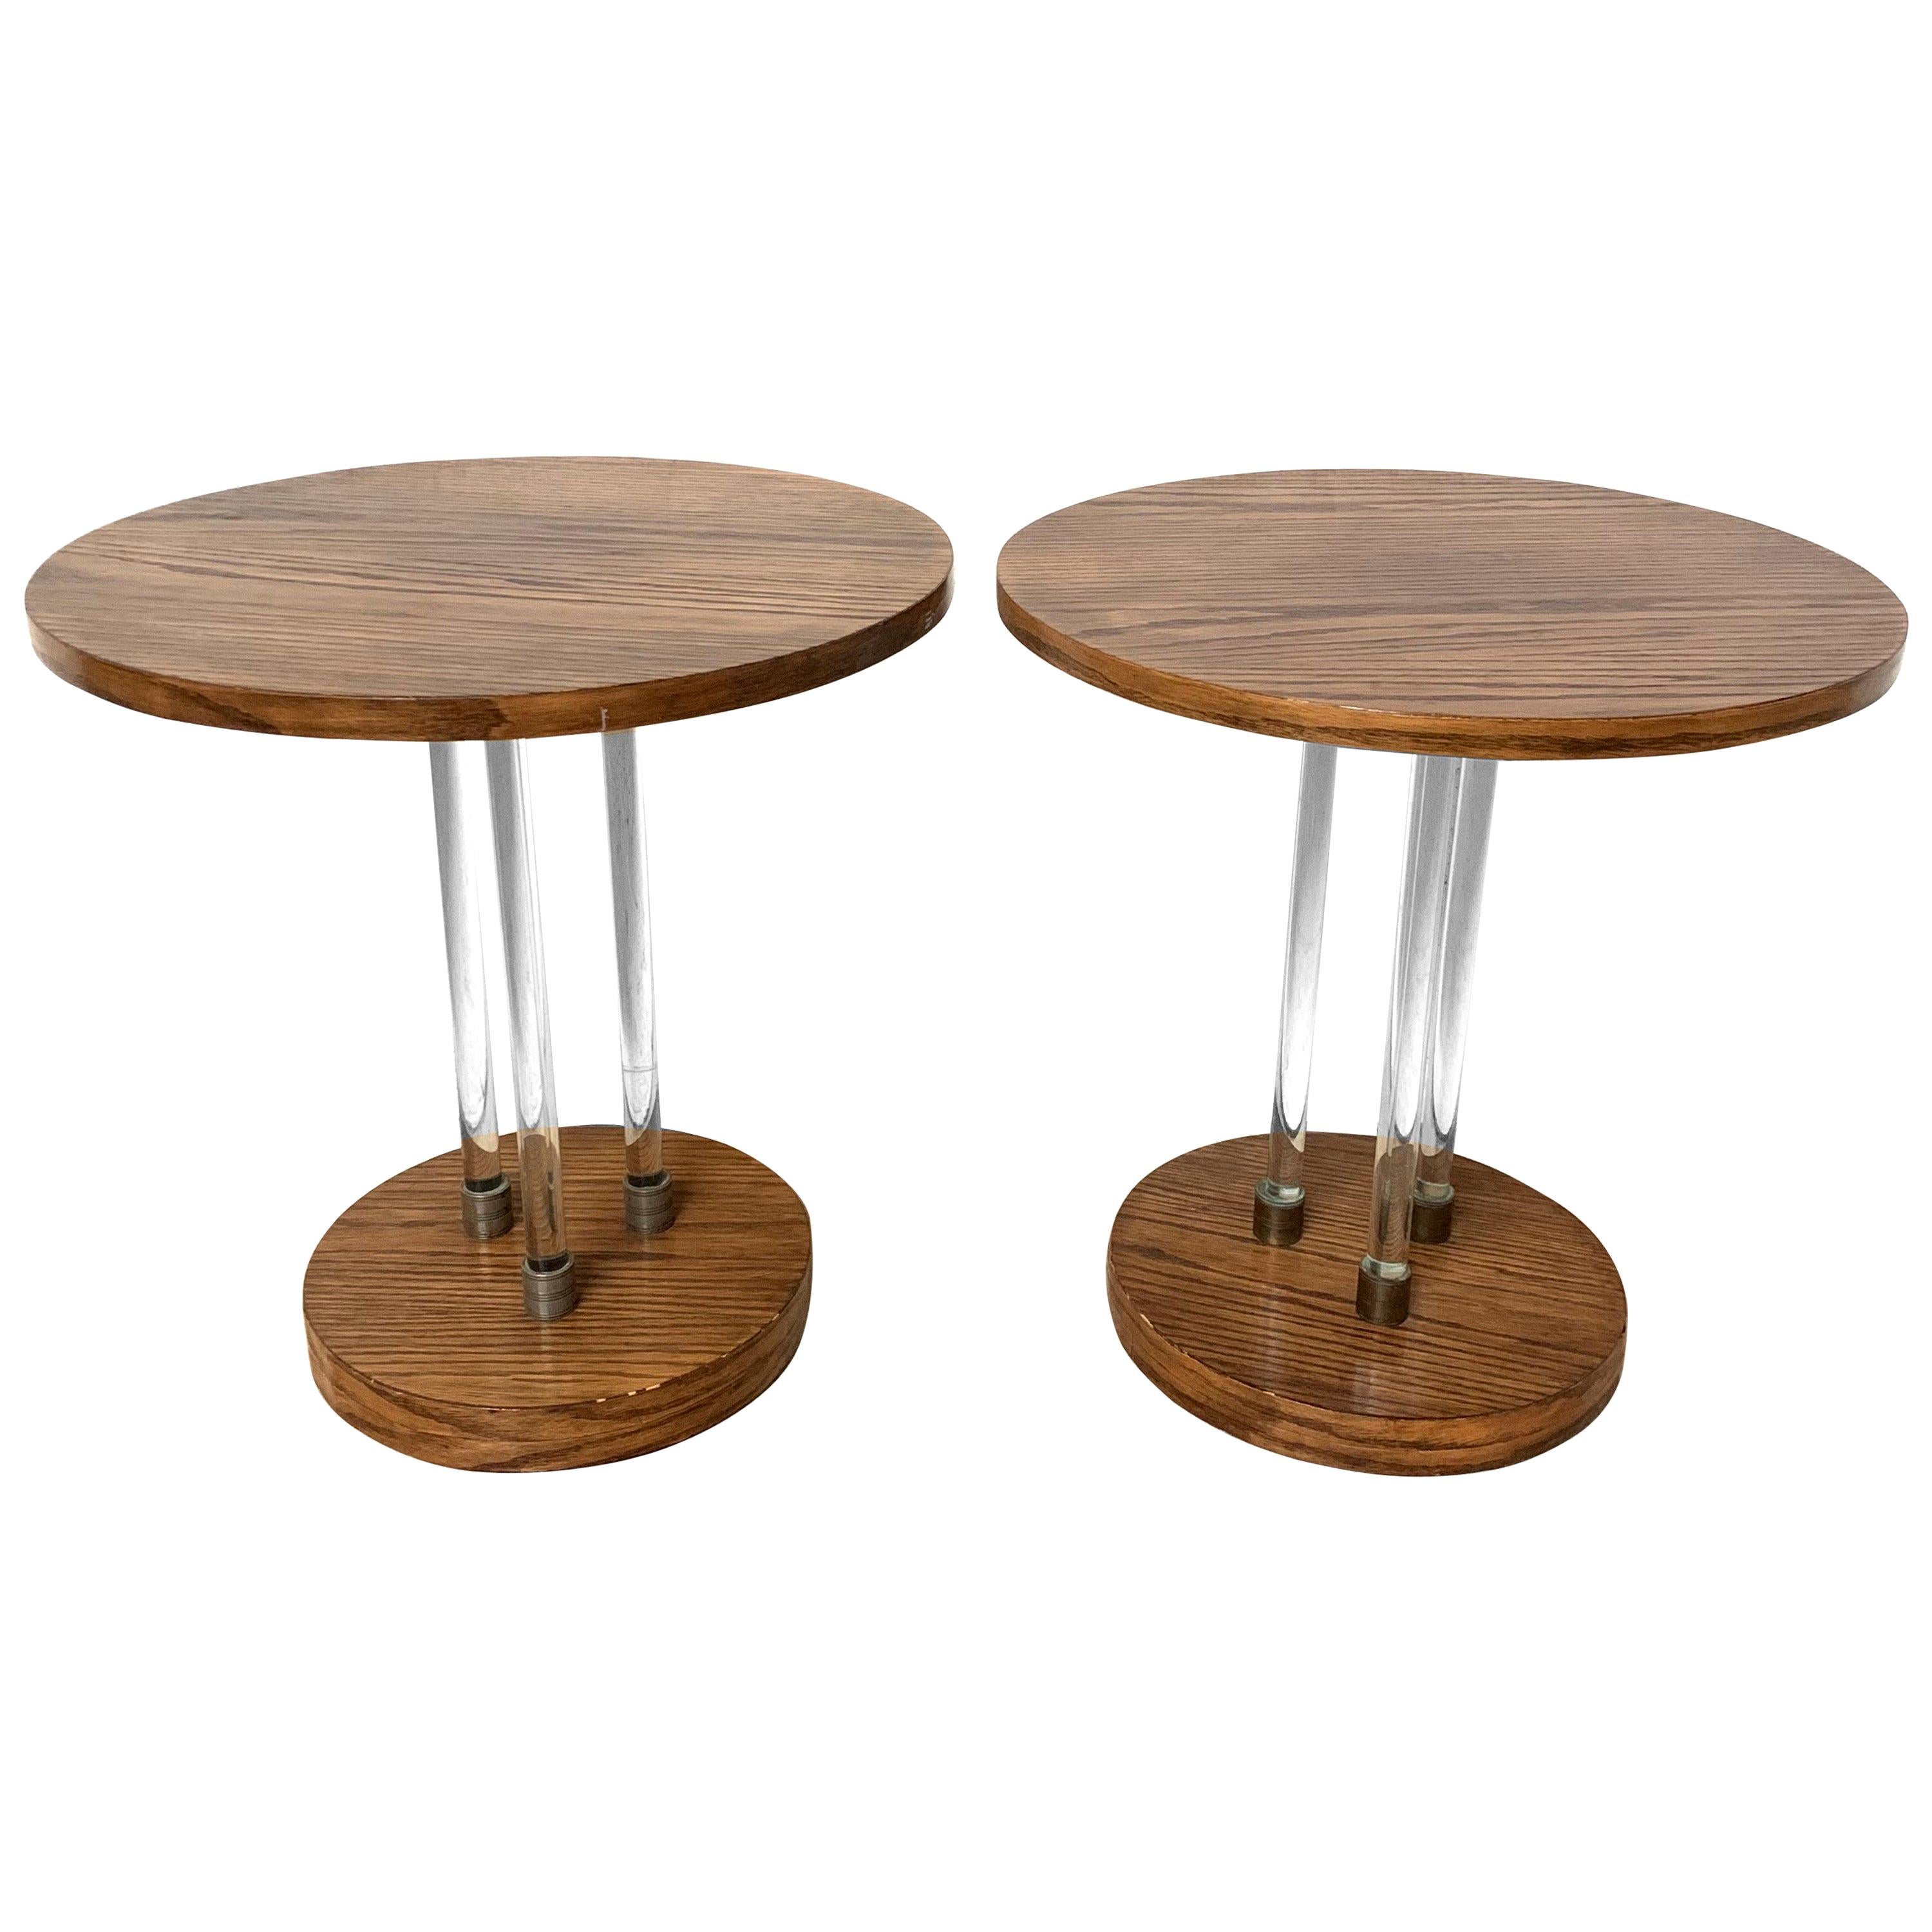 Pair of 20th Century Art Deco Oak and Glass Side or End Tables, France, 1930s